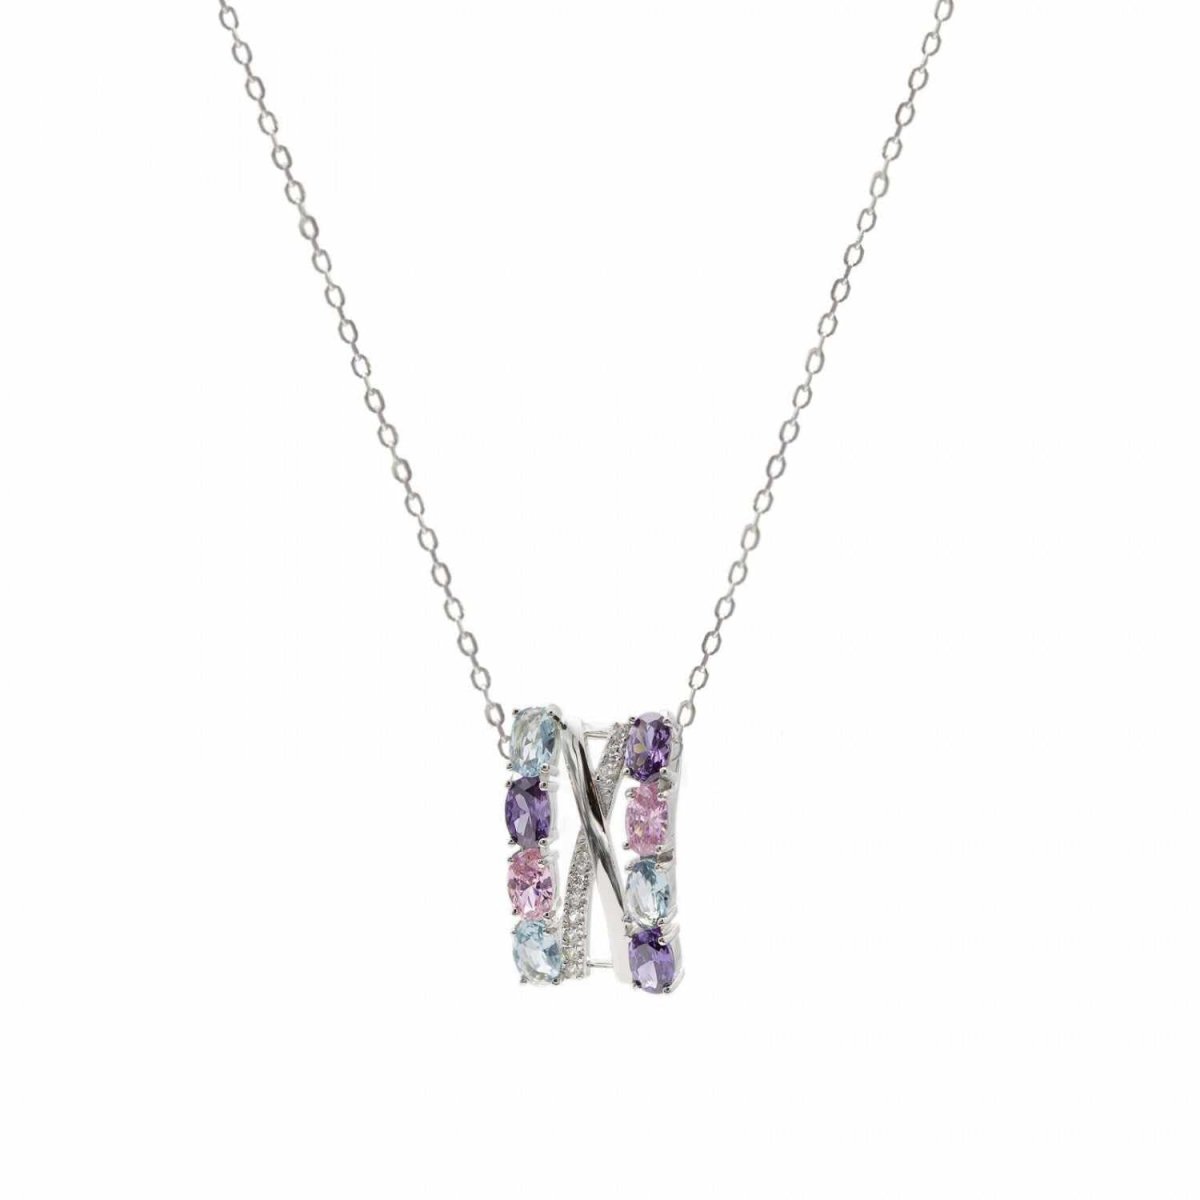 Necklace - Necklaces with stones in silver with amethyst cross design